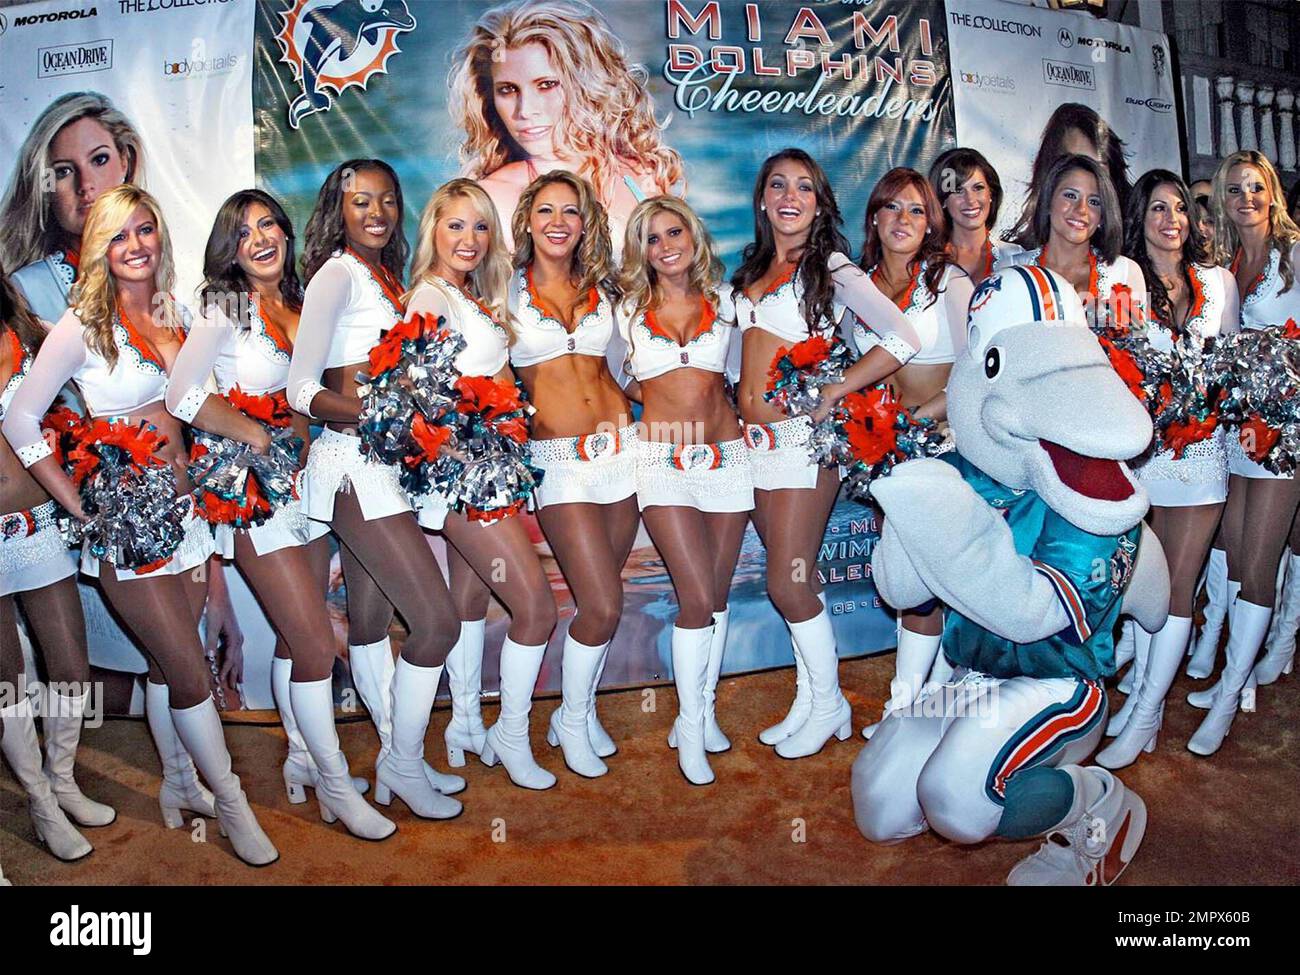 Miami dolphin cheerleader calendar hires stock photography and images